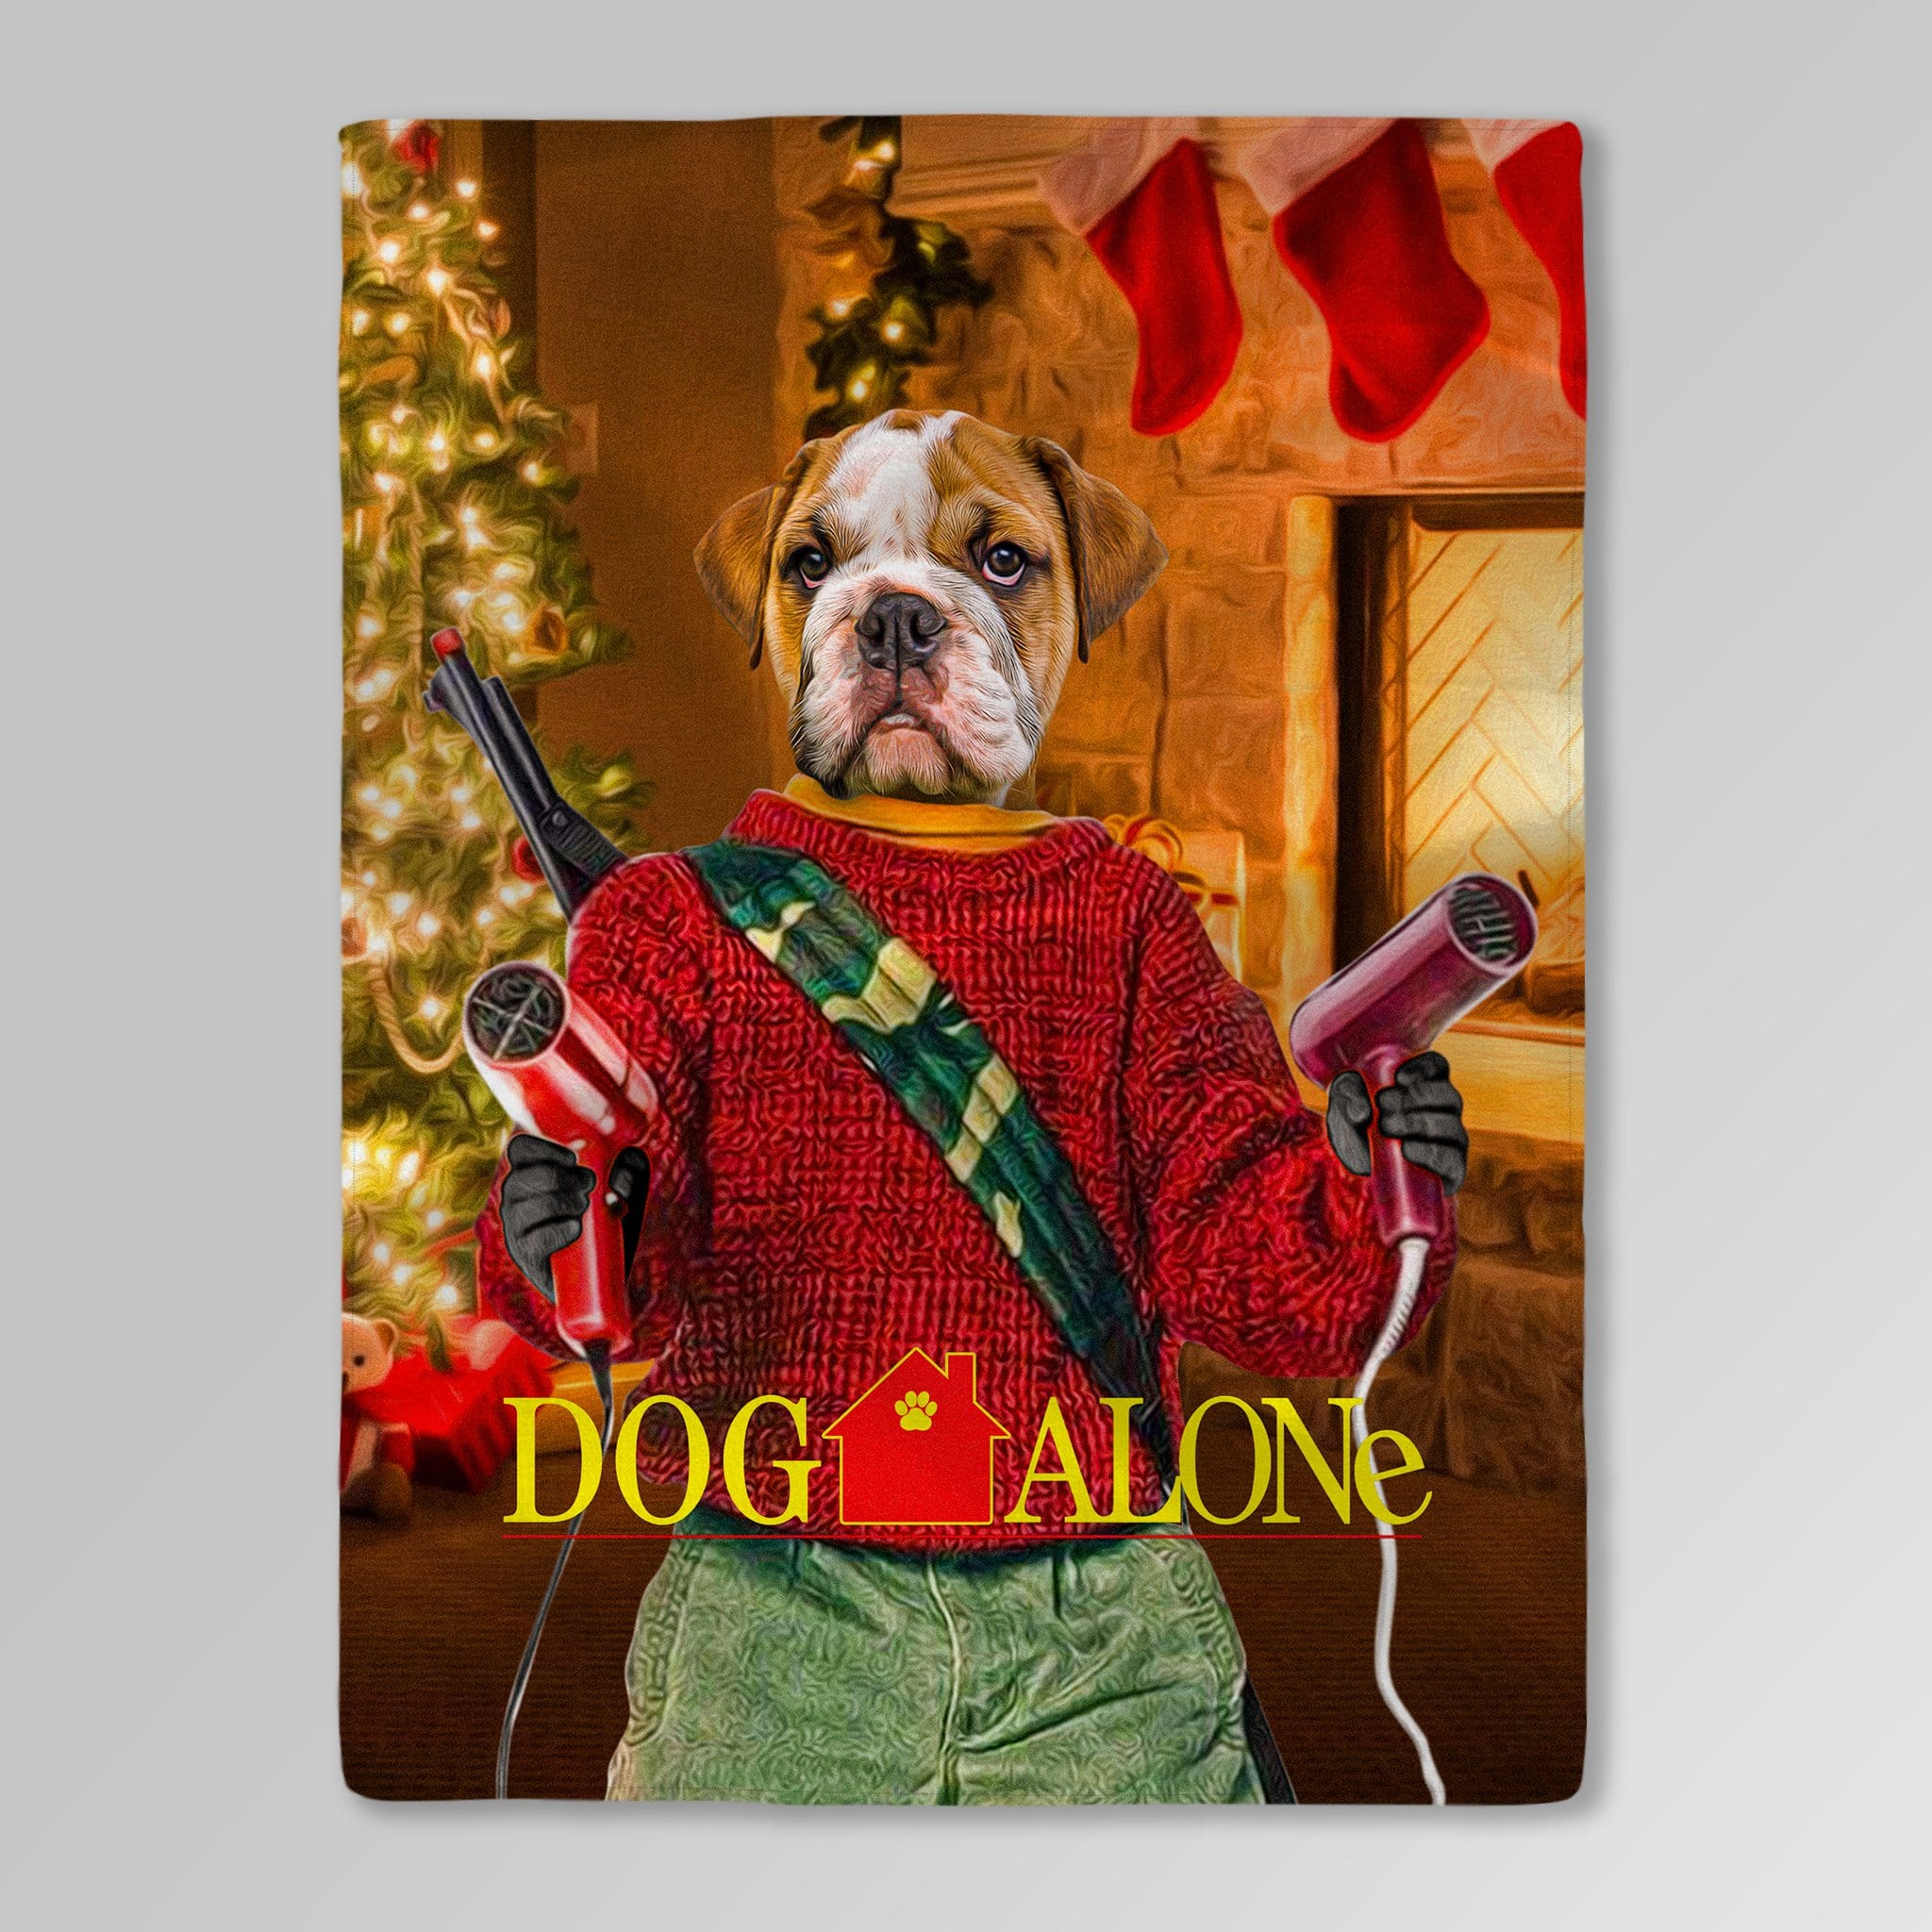 &#39;Dog Alone&#39; Personalized Pet Blanket